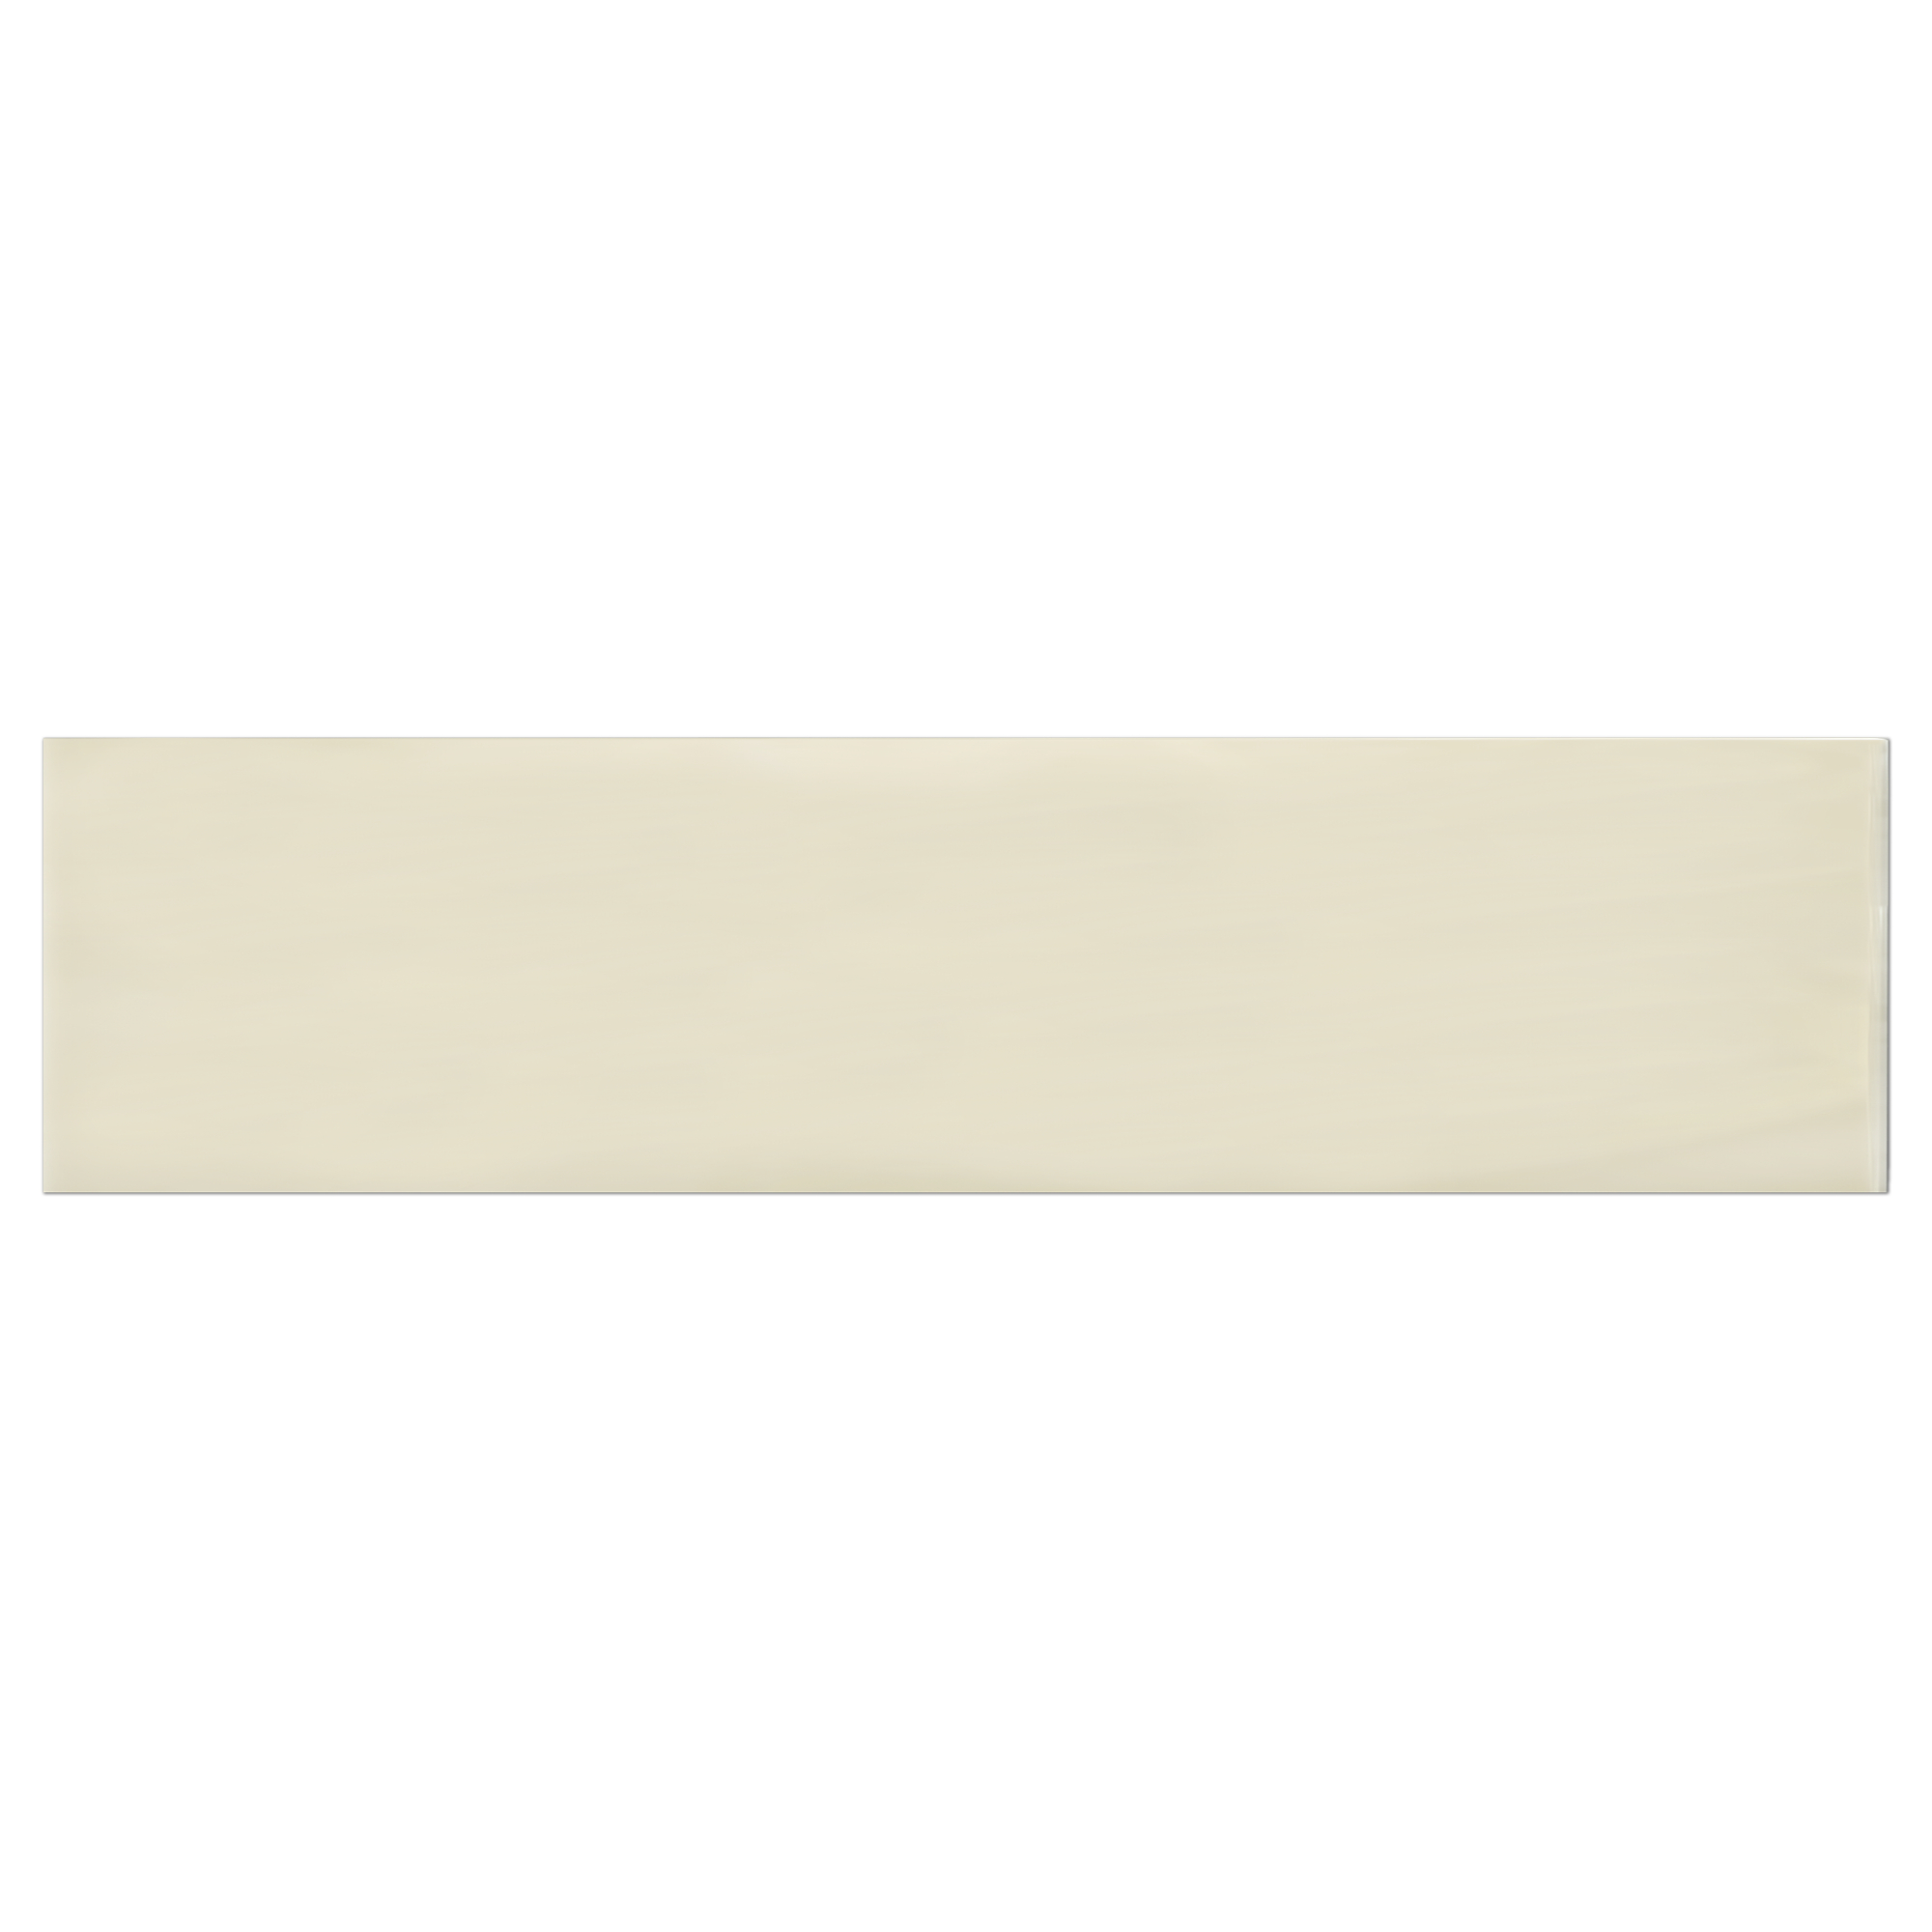 Imperial Ivory Gls 10x40 REL